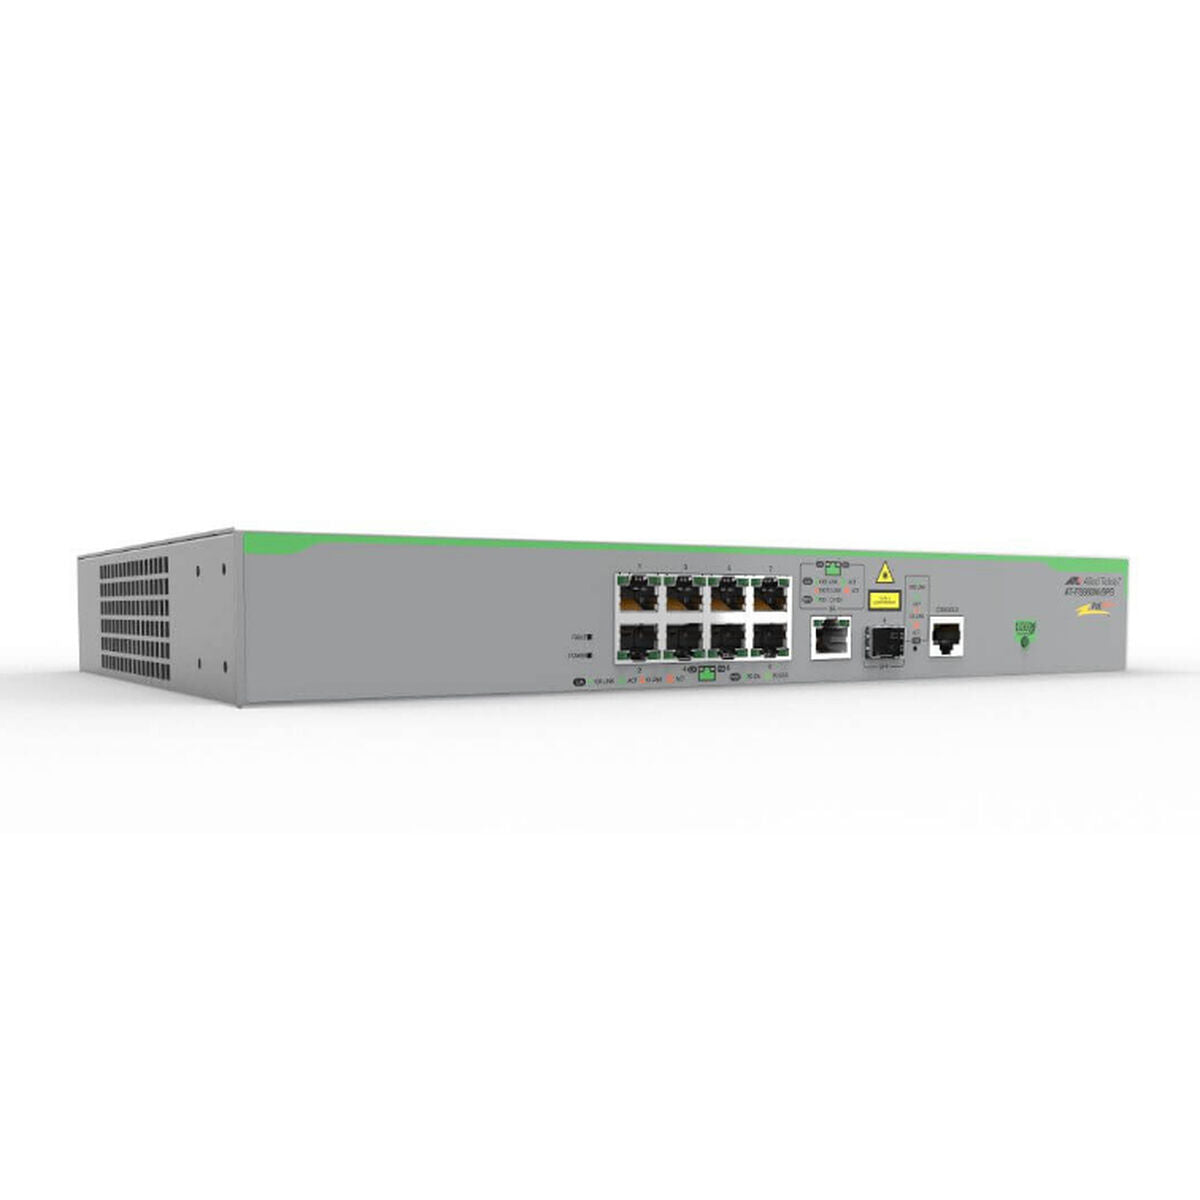 Switch Allied Telesis AT-FS980M/9PS-50, Allied Telesis, Computing, Network devices, switch-allied-telesis-at-fs980m-9ps-50, Brand_Allied Telesis, category-reference-2609, category-reference-2803, category-reference-2827, category-reference-t-19685, category-reference-t-19914, Condition_NEW, networks/wiring, Price_600 - 700, Teleworking, RiotNook